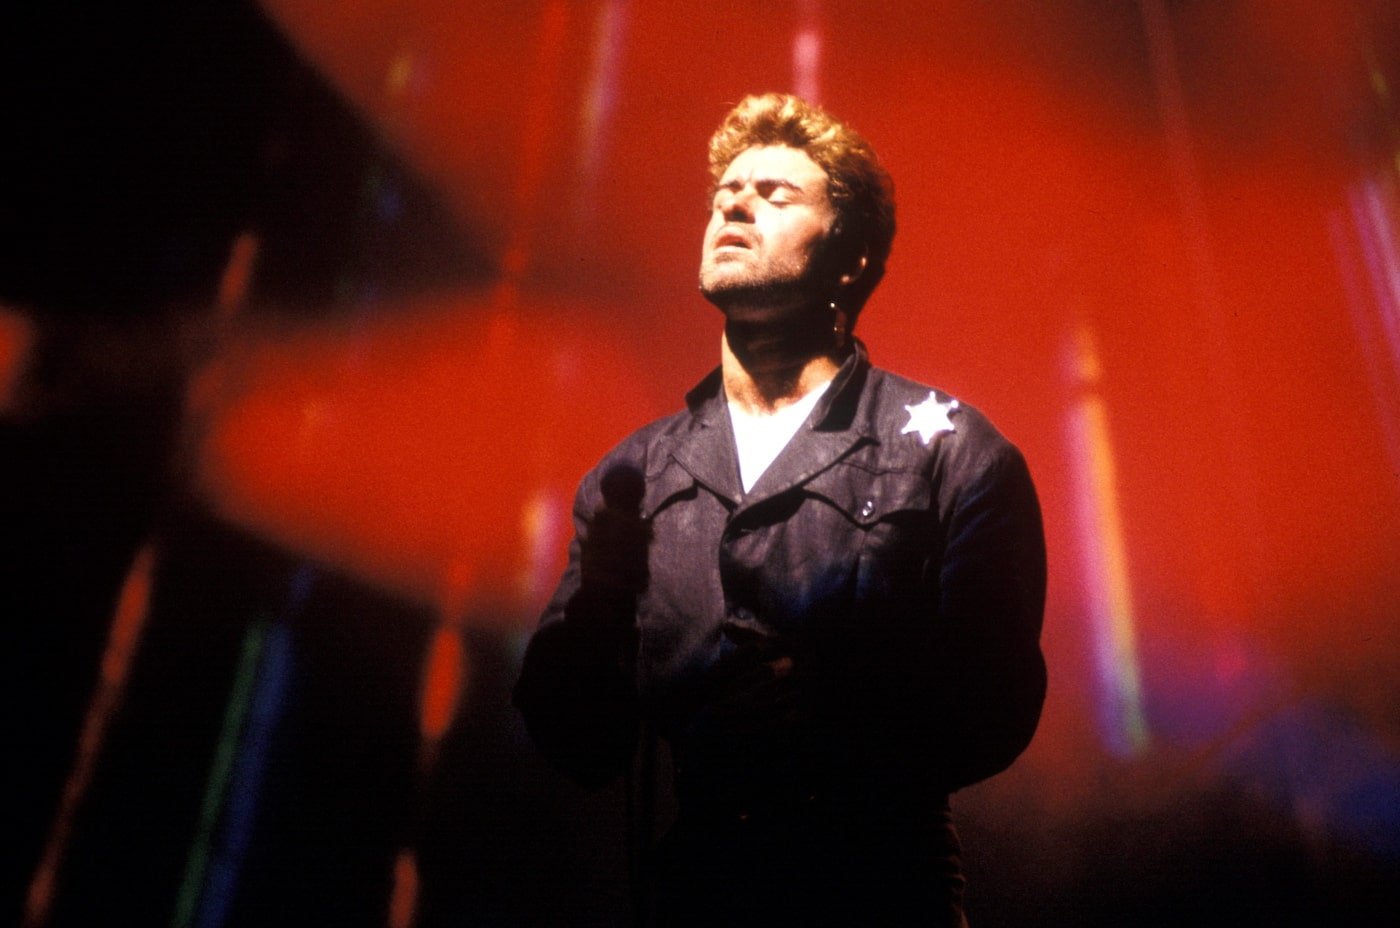 George Michael on stage with eyes closed